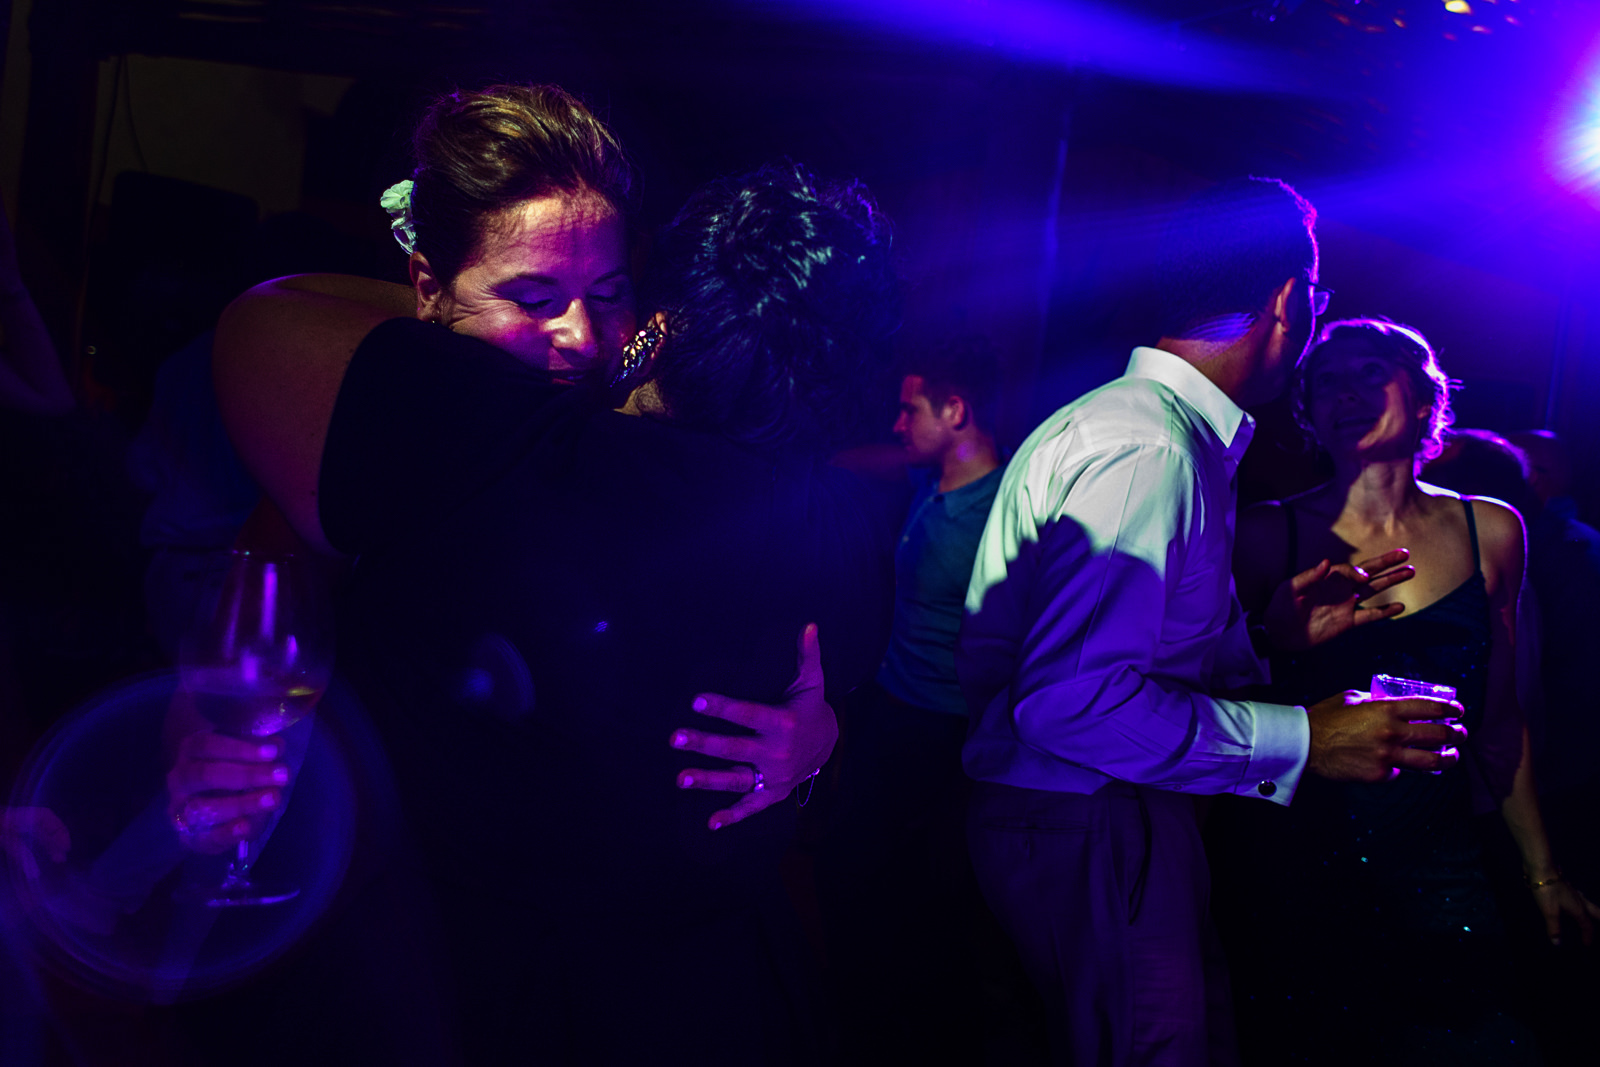 Friend of the bride giving her a hug in the middle of the dance floor